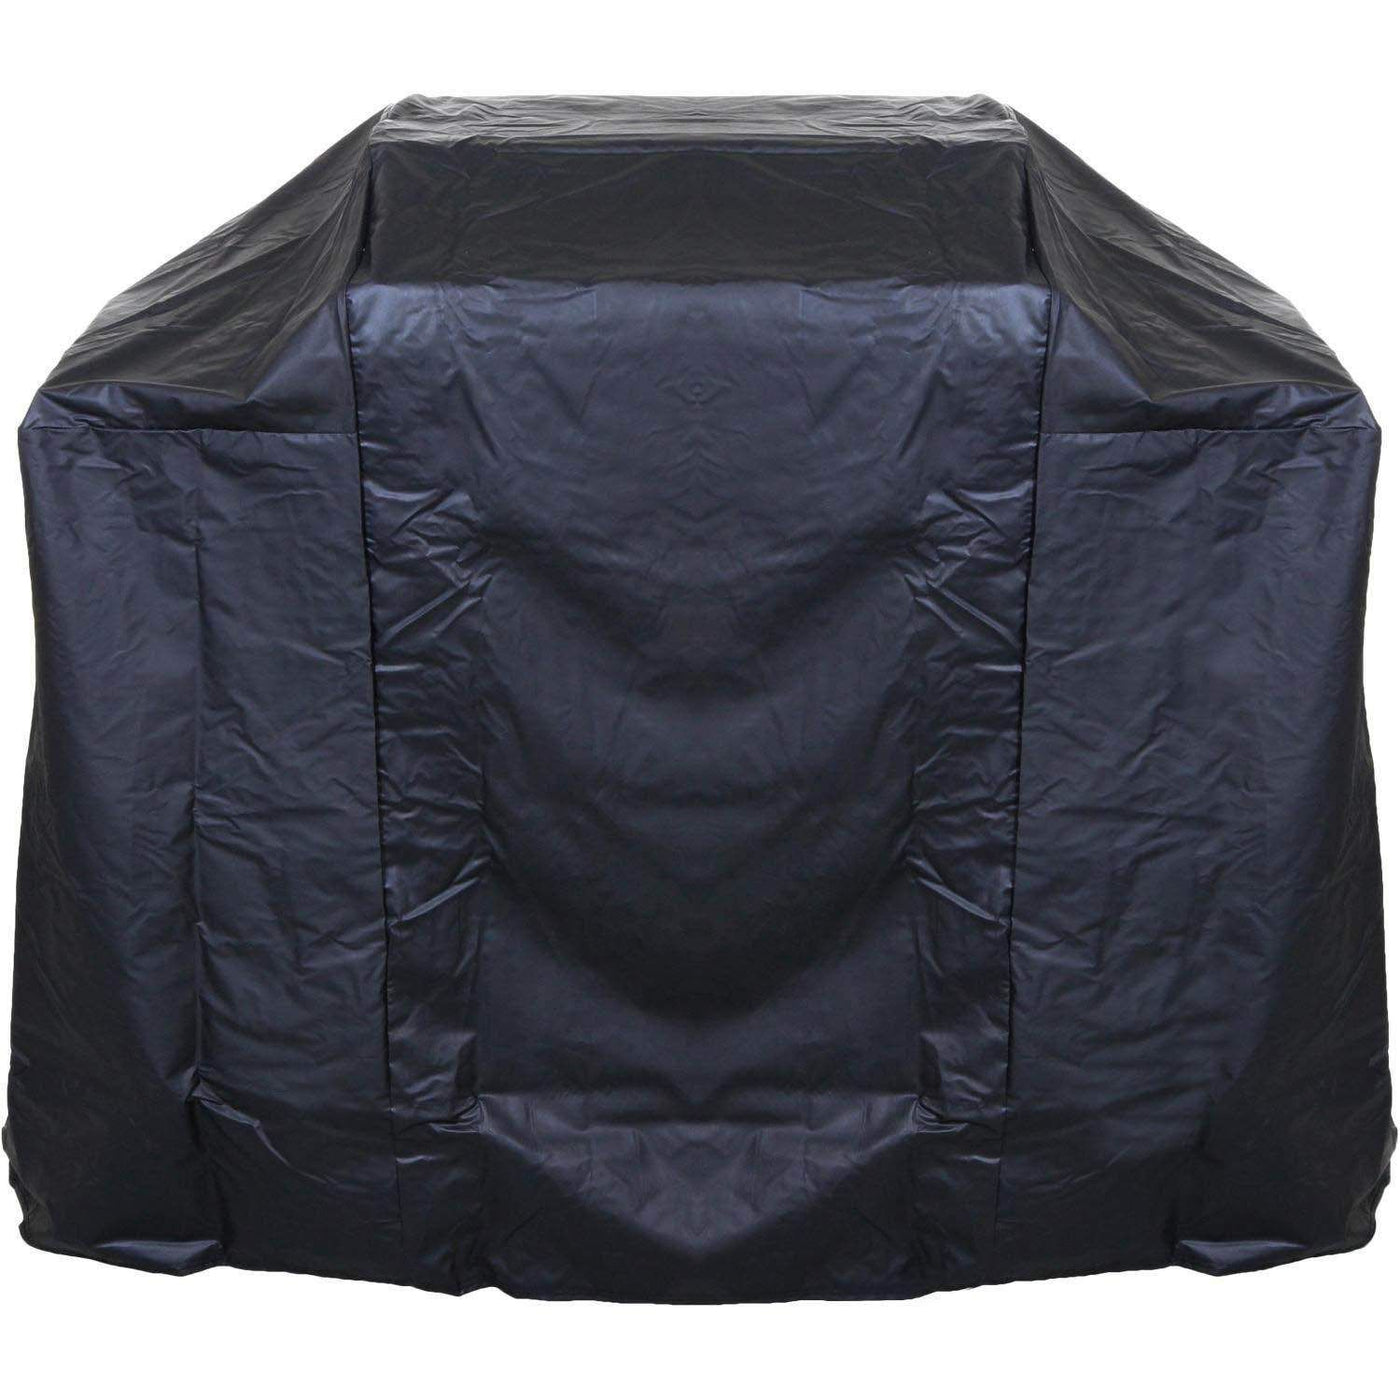 American Outdoor Grill 24" Portable Grill Cover